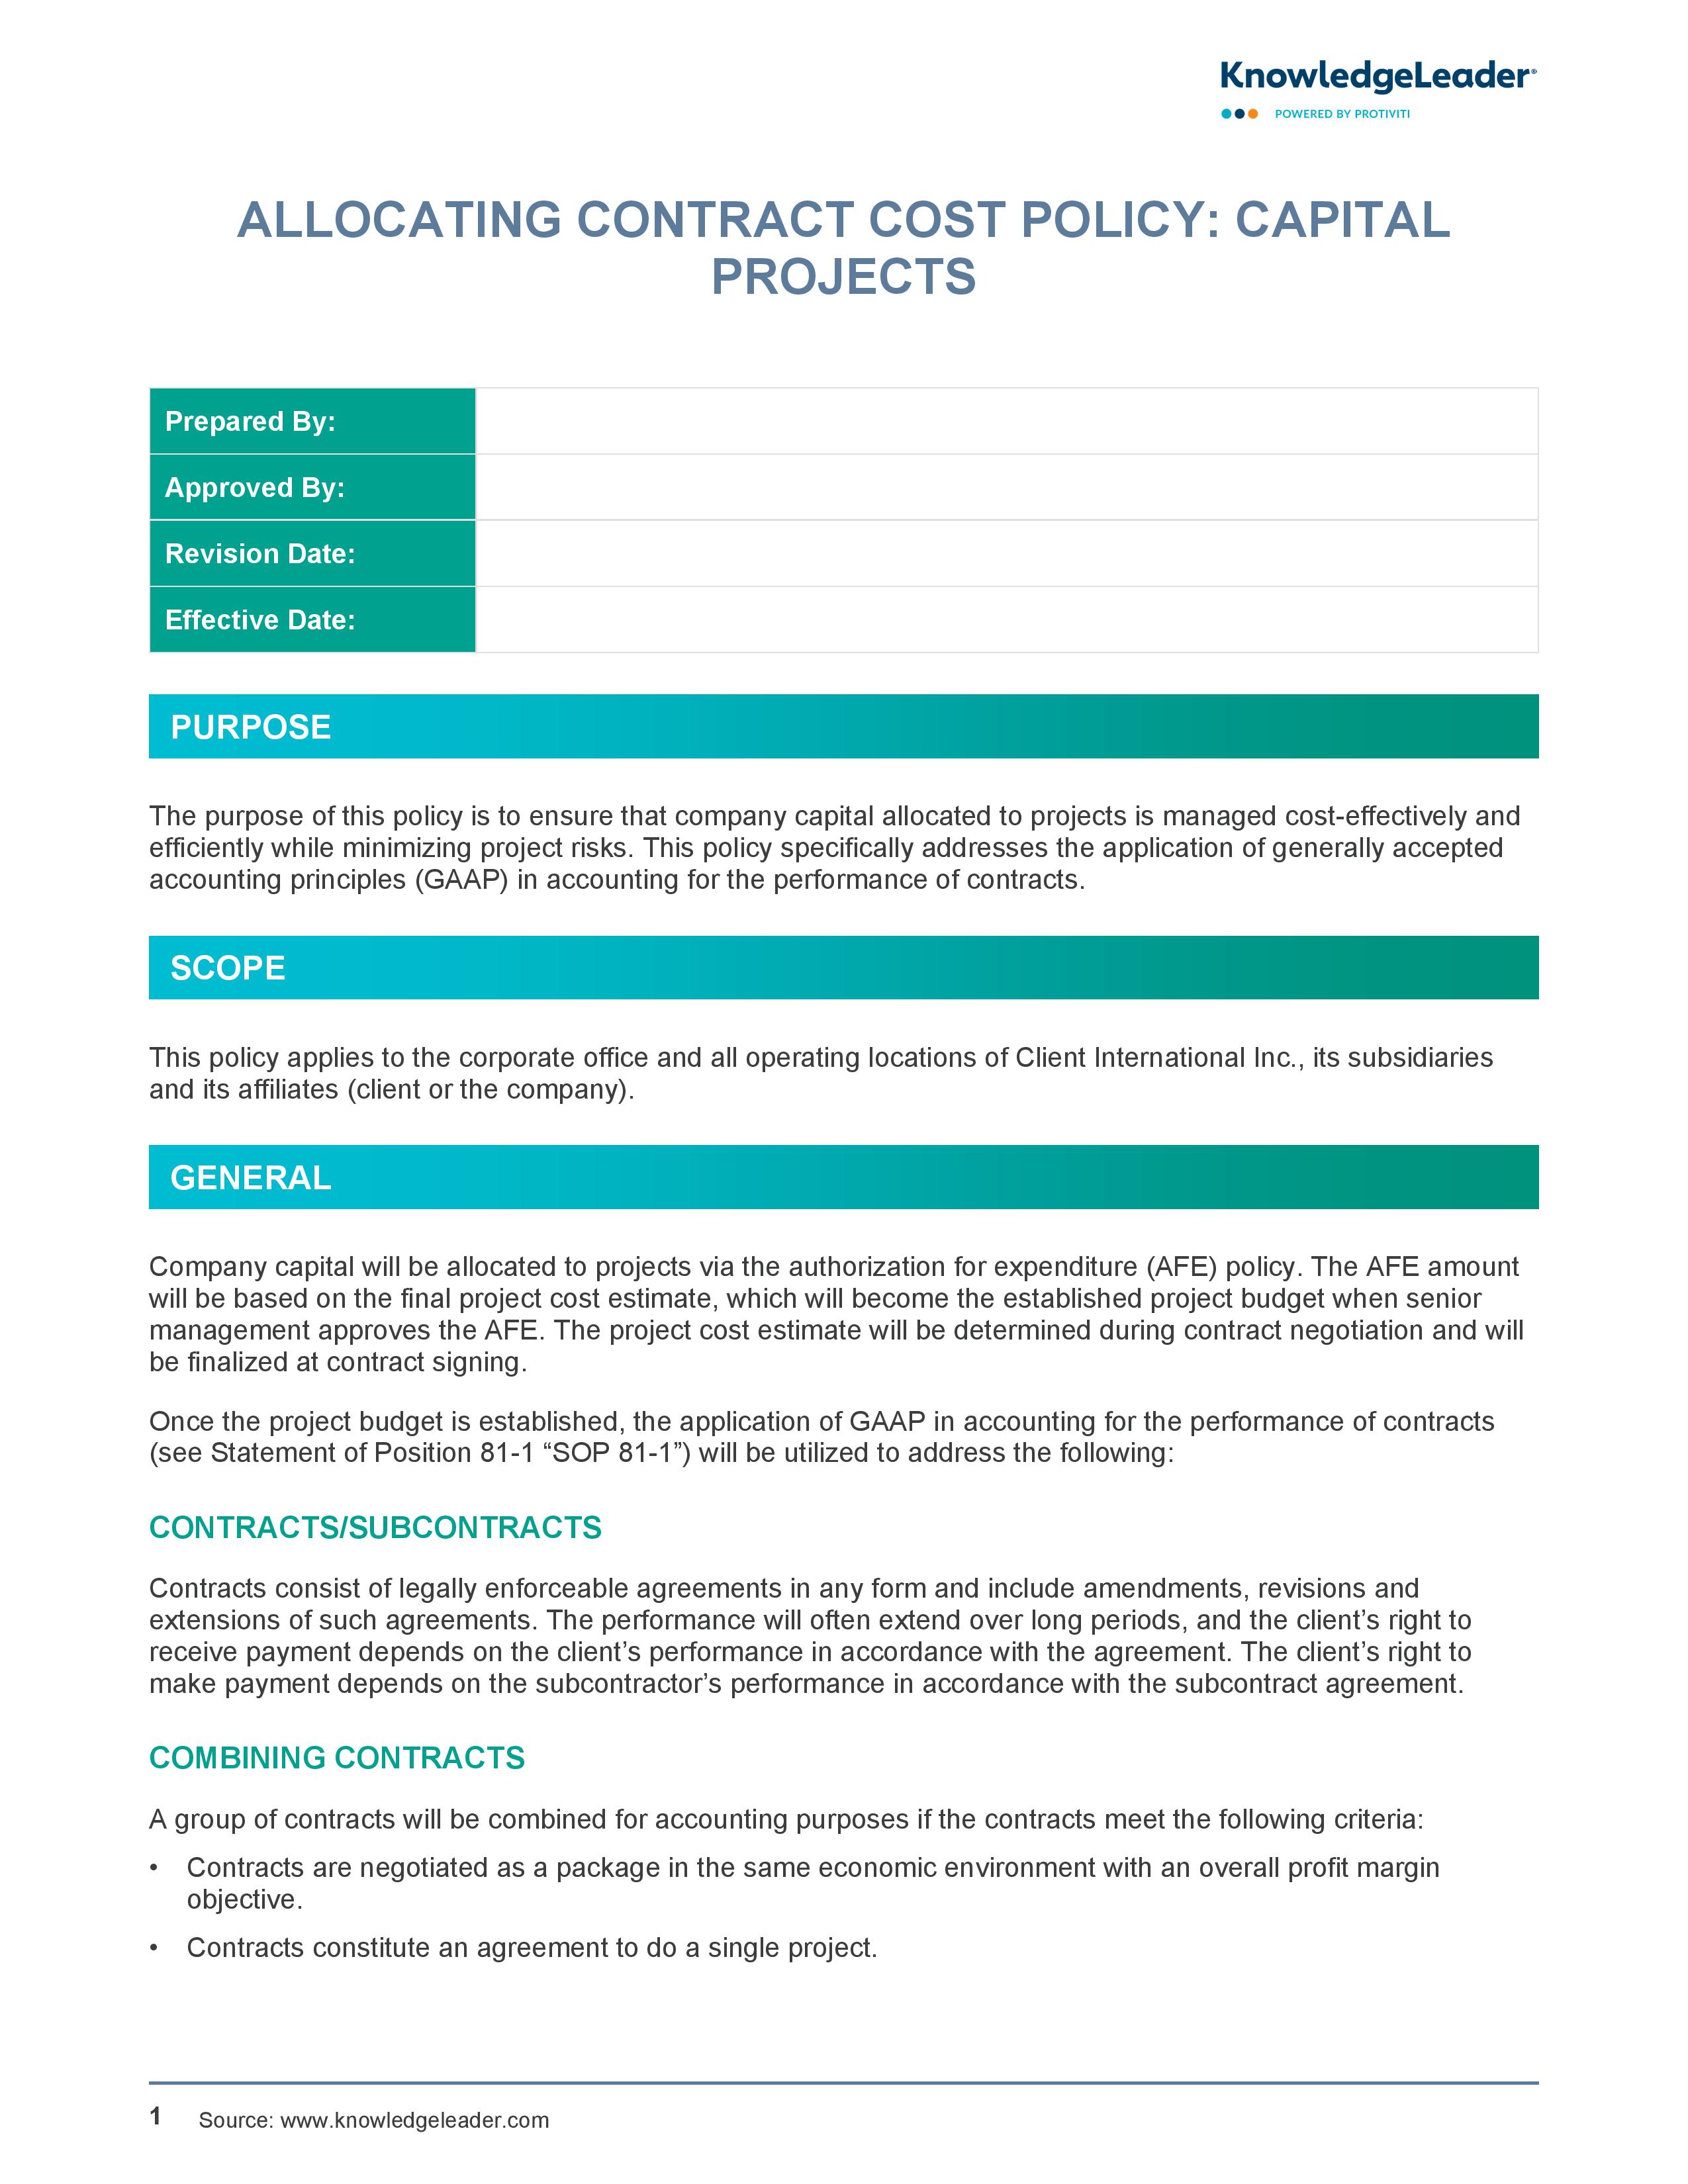 screenshot of the first page of Allocating Contract Cost Policy Capital Projects